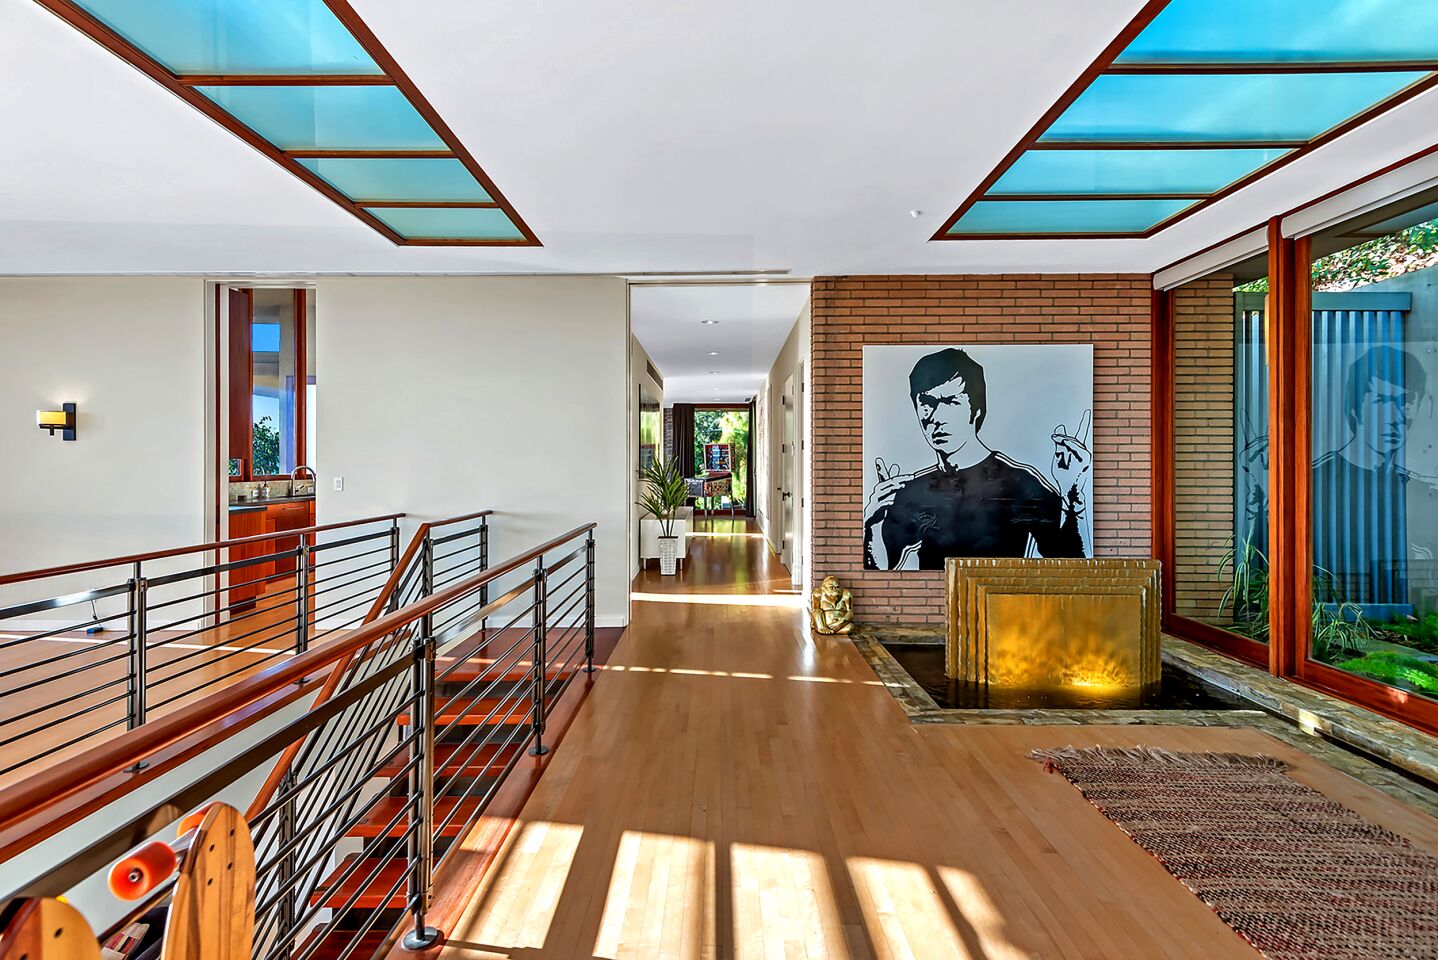 An open space has large windows, a brick wall with artwork of Bruce Lee and staircase to a lower floor.